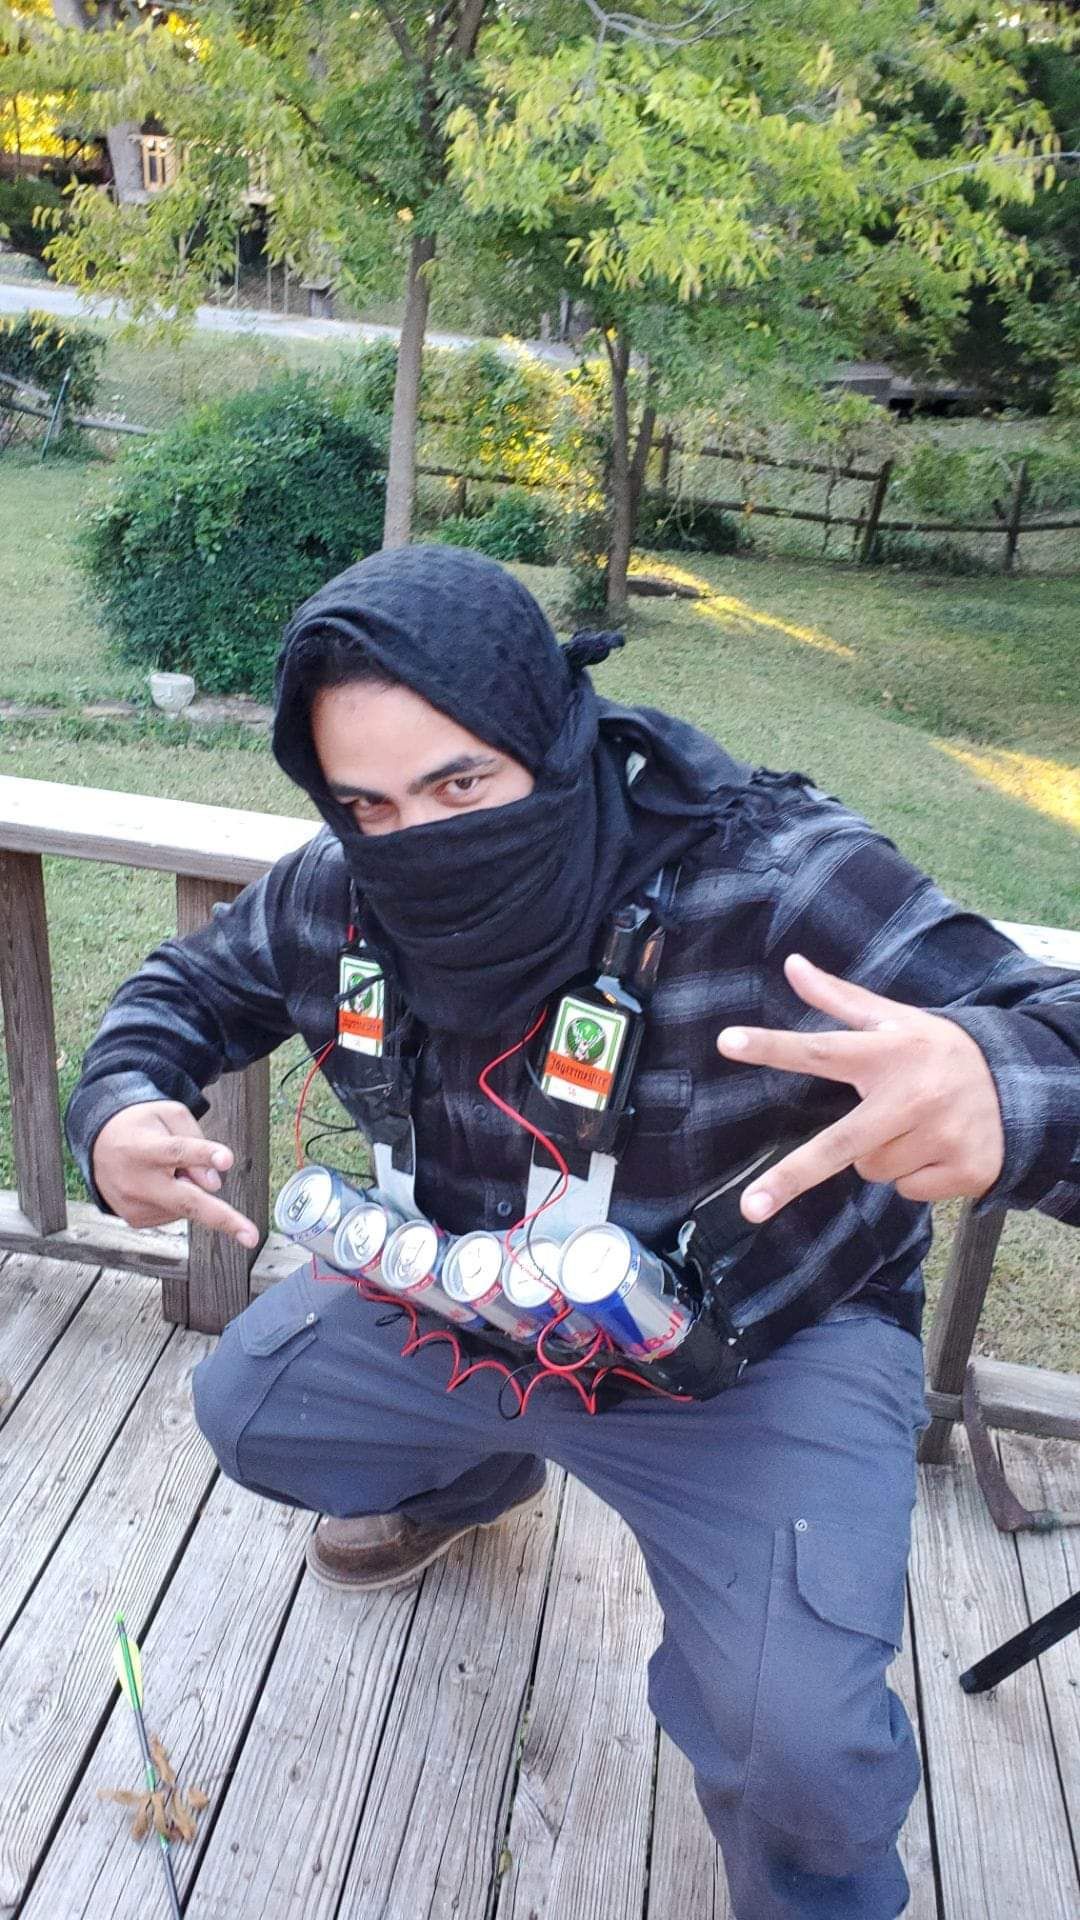 My friend dressed up for Halloween as a Jäger bomber